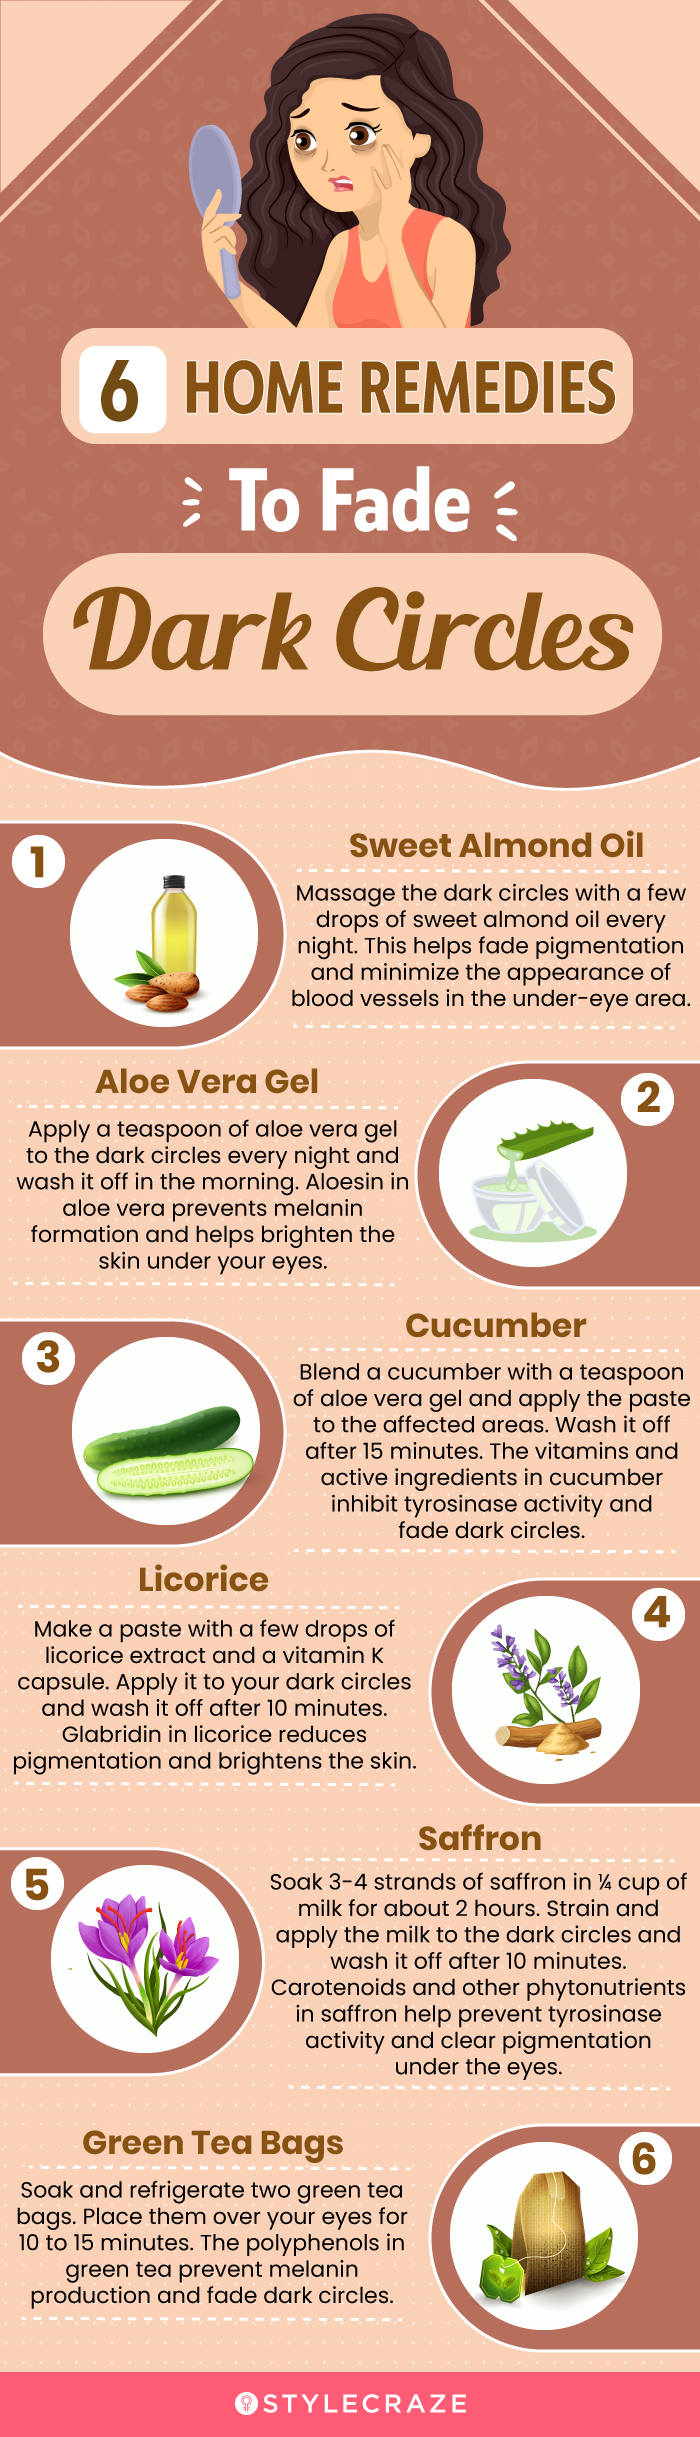 6 home remedies to fade under eye dark circles [infographic]